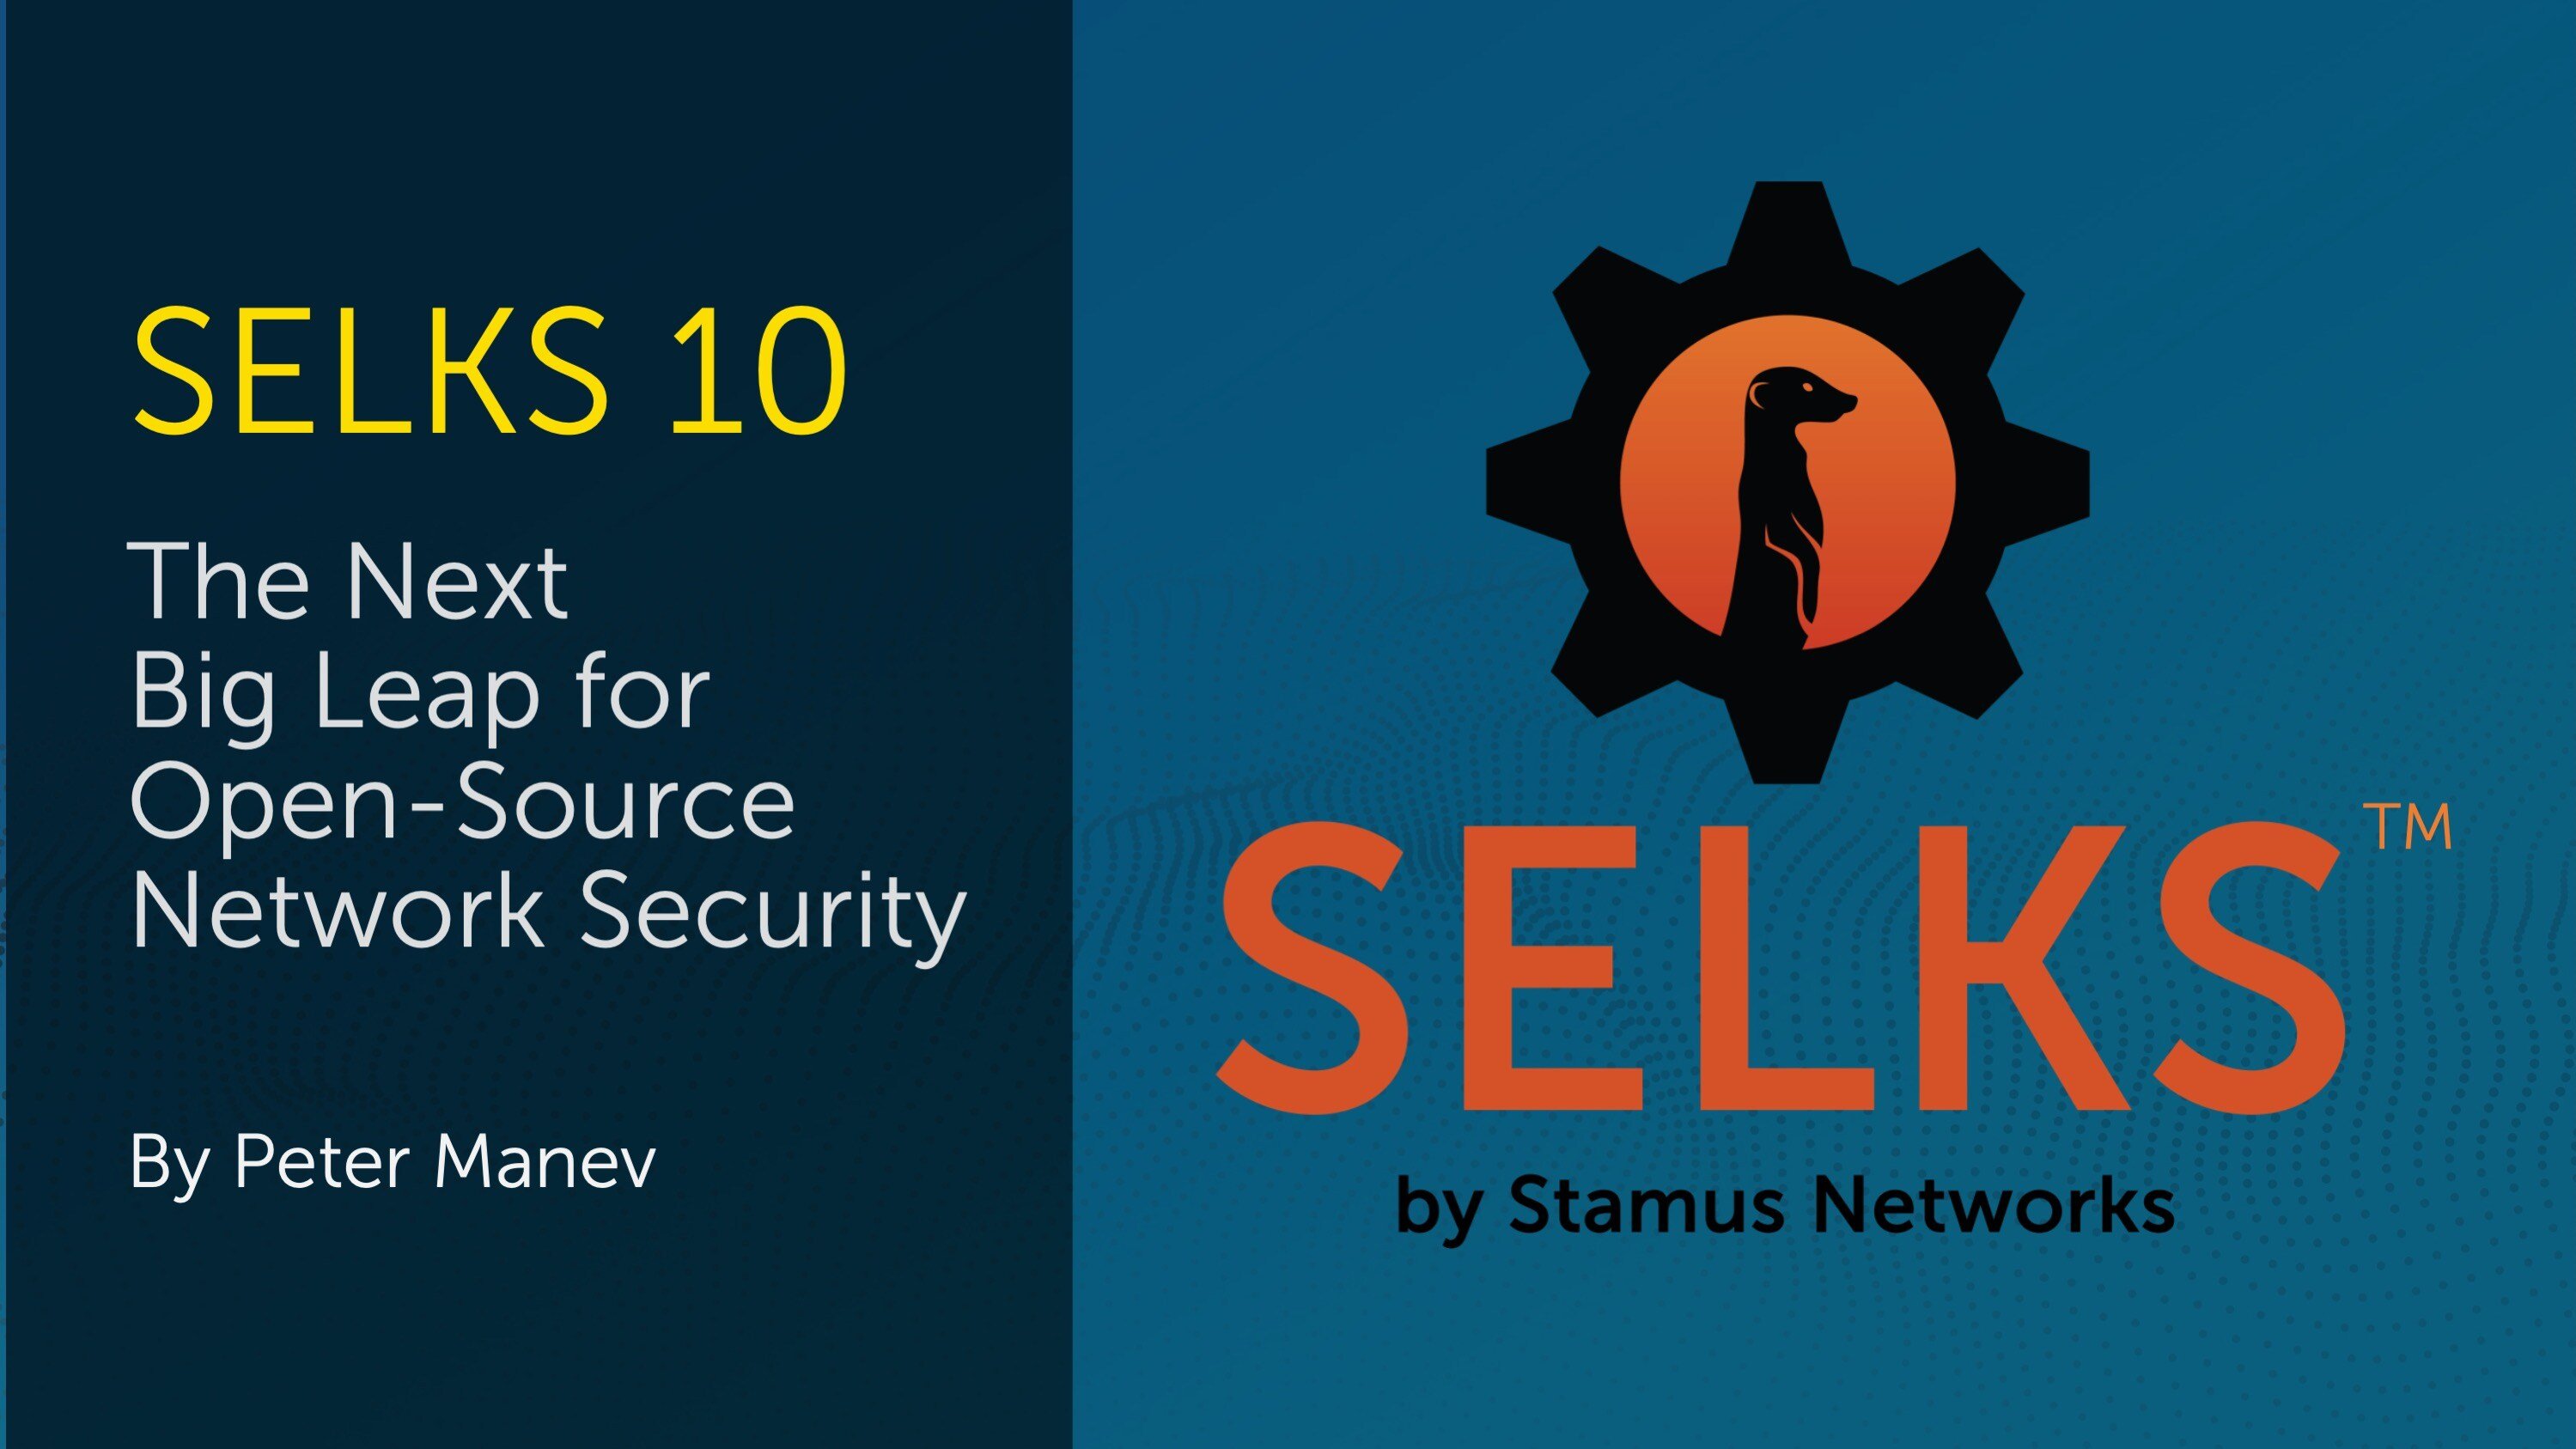 SELKS 10: The Next Big Leap for Open-Source Network Security by Peter Manev